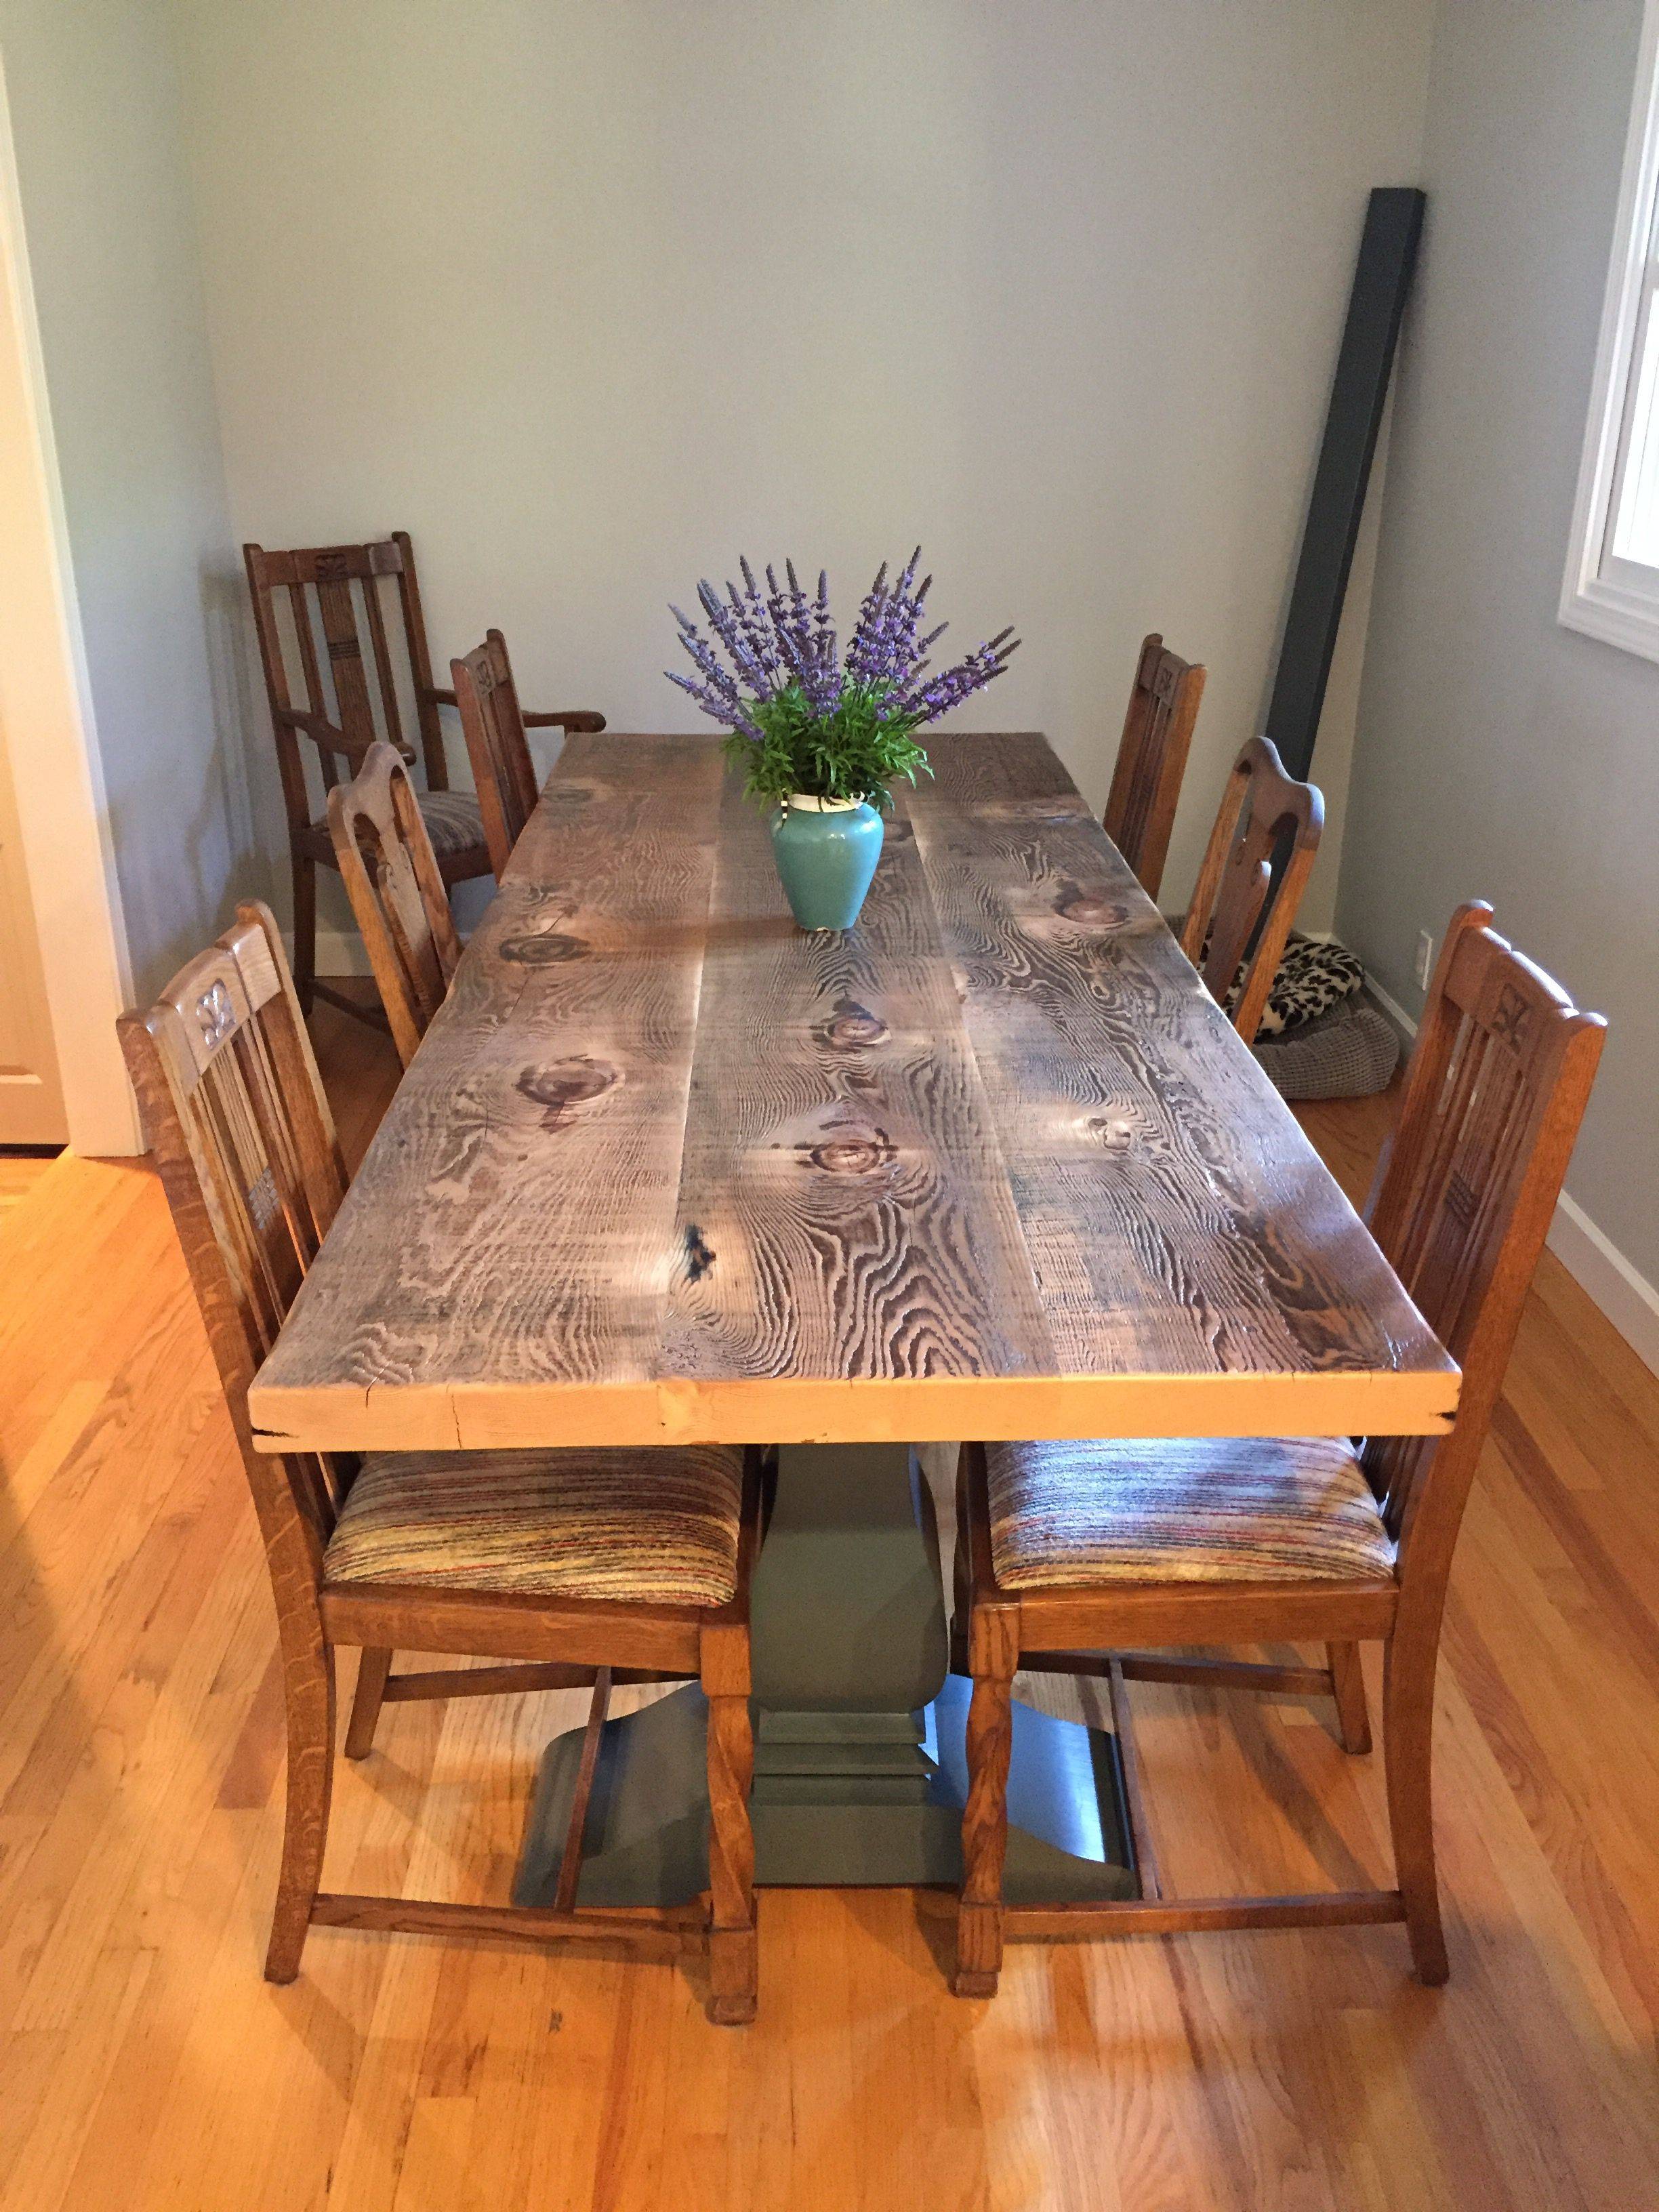 Long wooden table